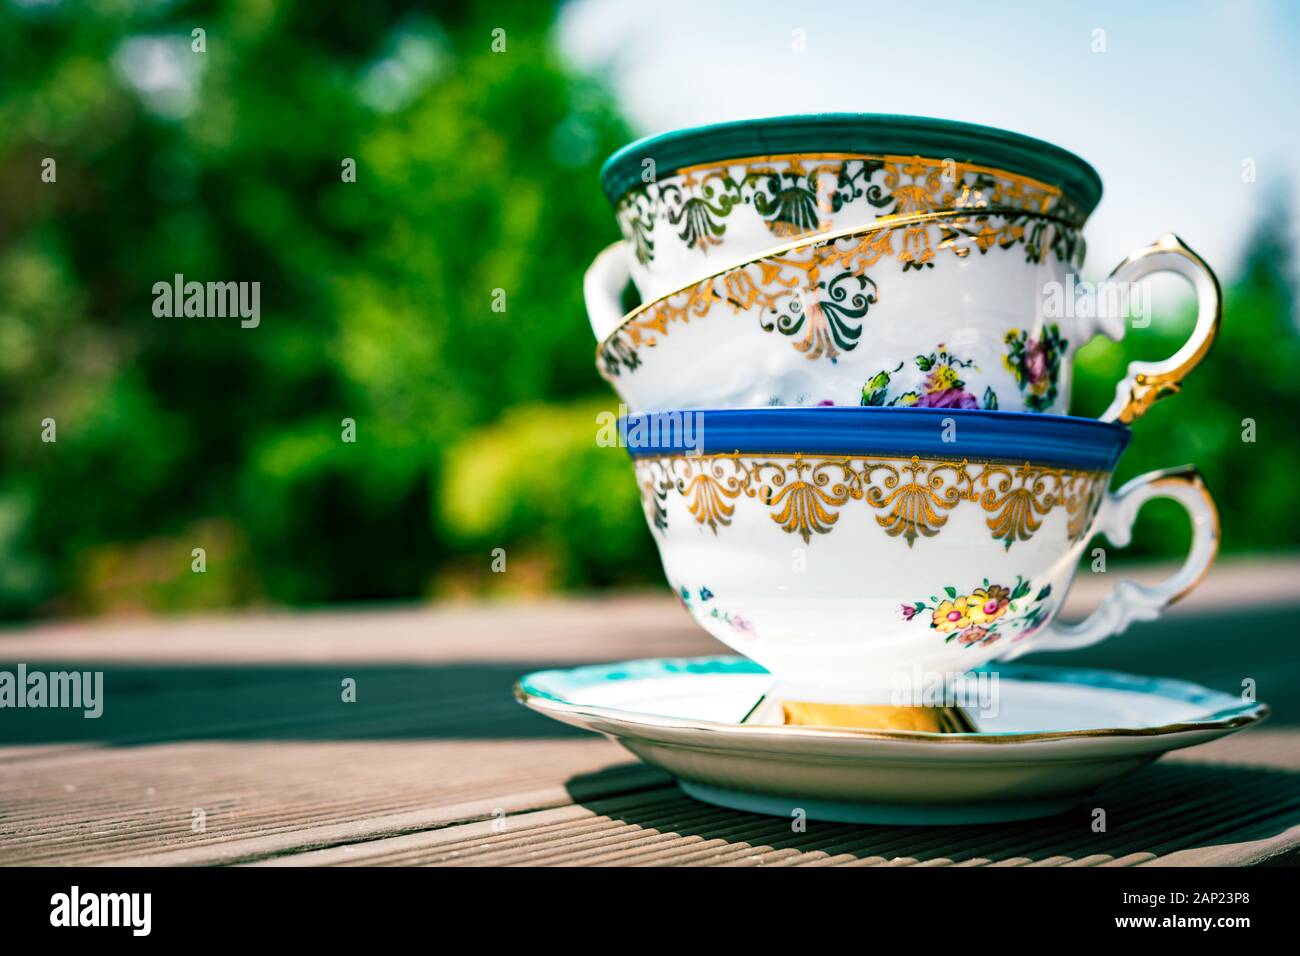 https://c8.alamy.com/comp/2AP23P8/set-of-three-vintage-porcelain-tea-cups-stacked-together-hand-painted-floral-decorations-and-golden-ornaments-2AP23P8.jpg